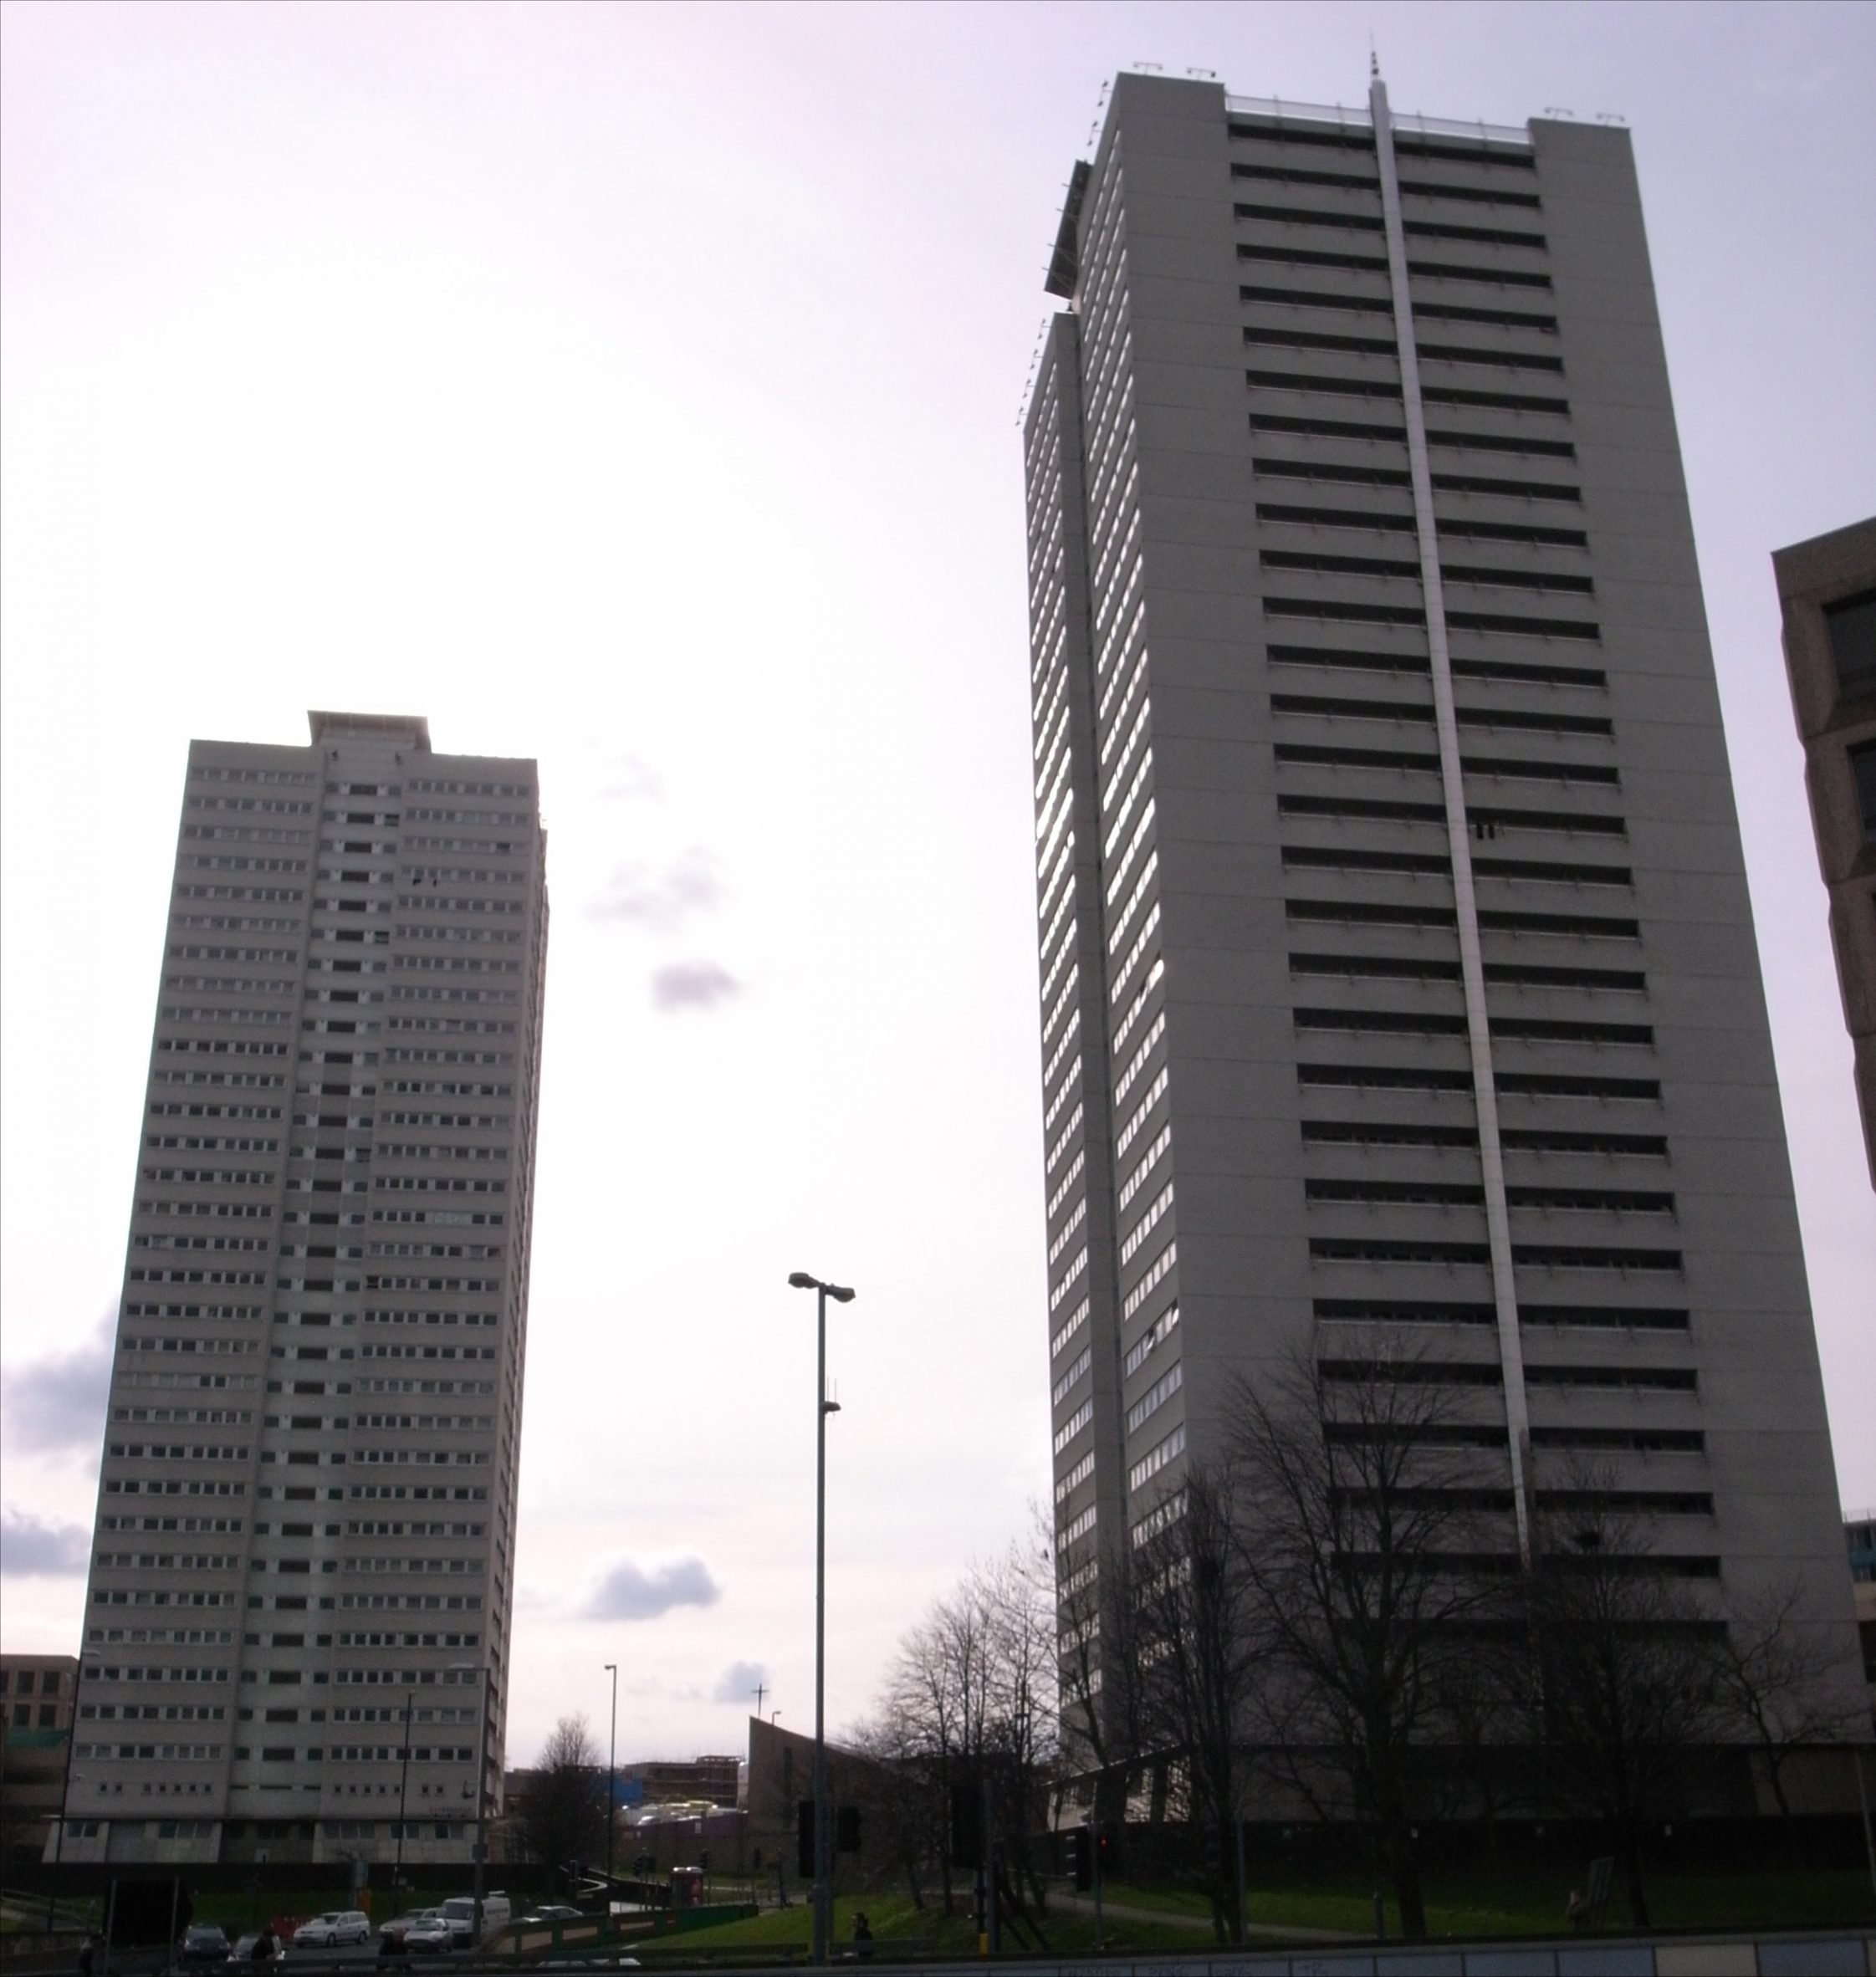 The Sentinels towers in Birmingham